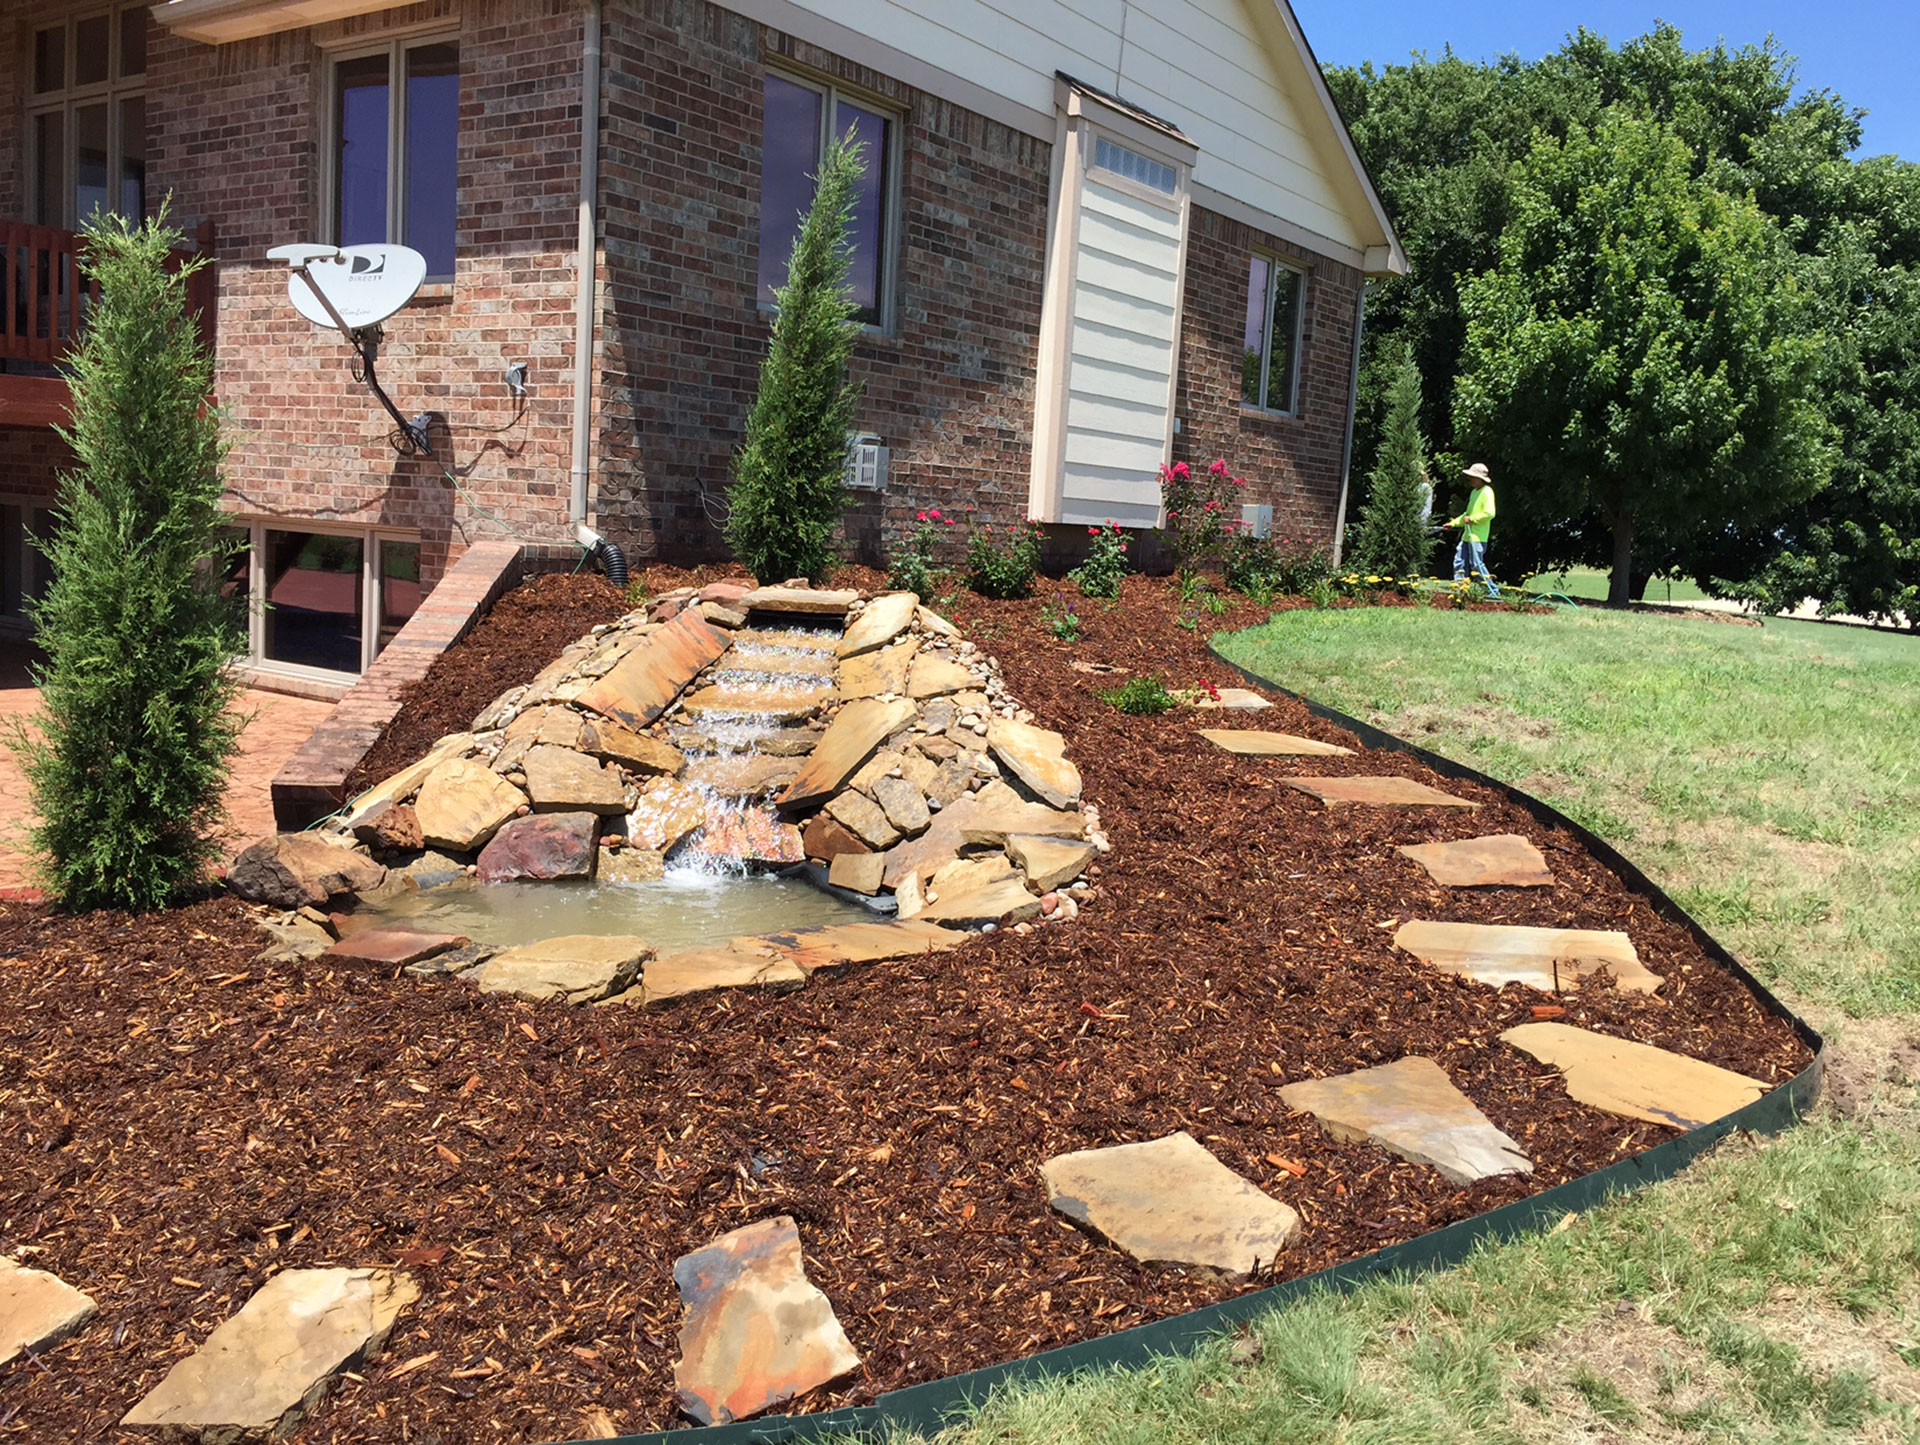 Landscaping can add value to your home